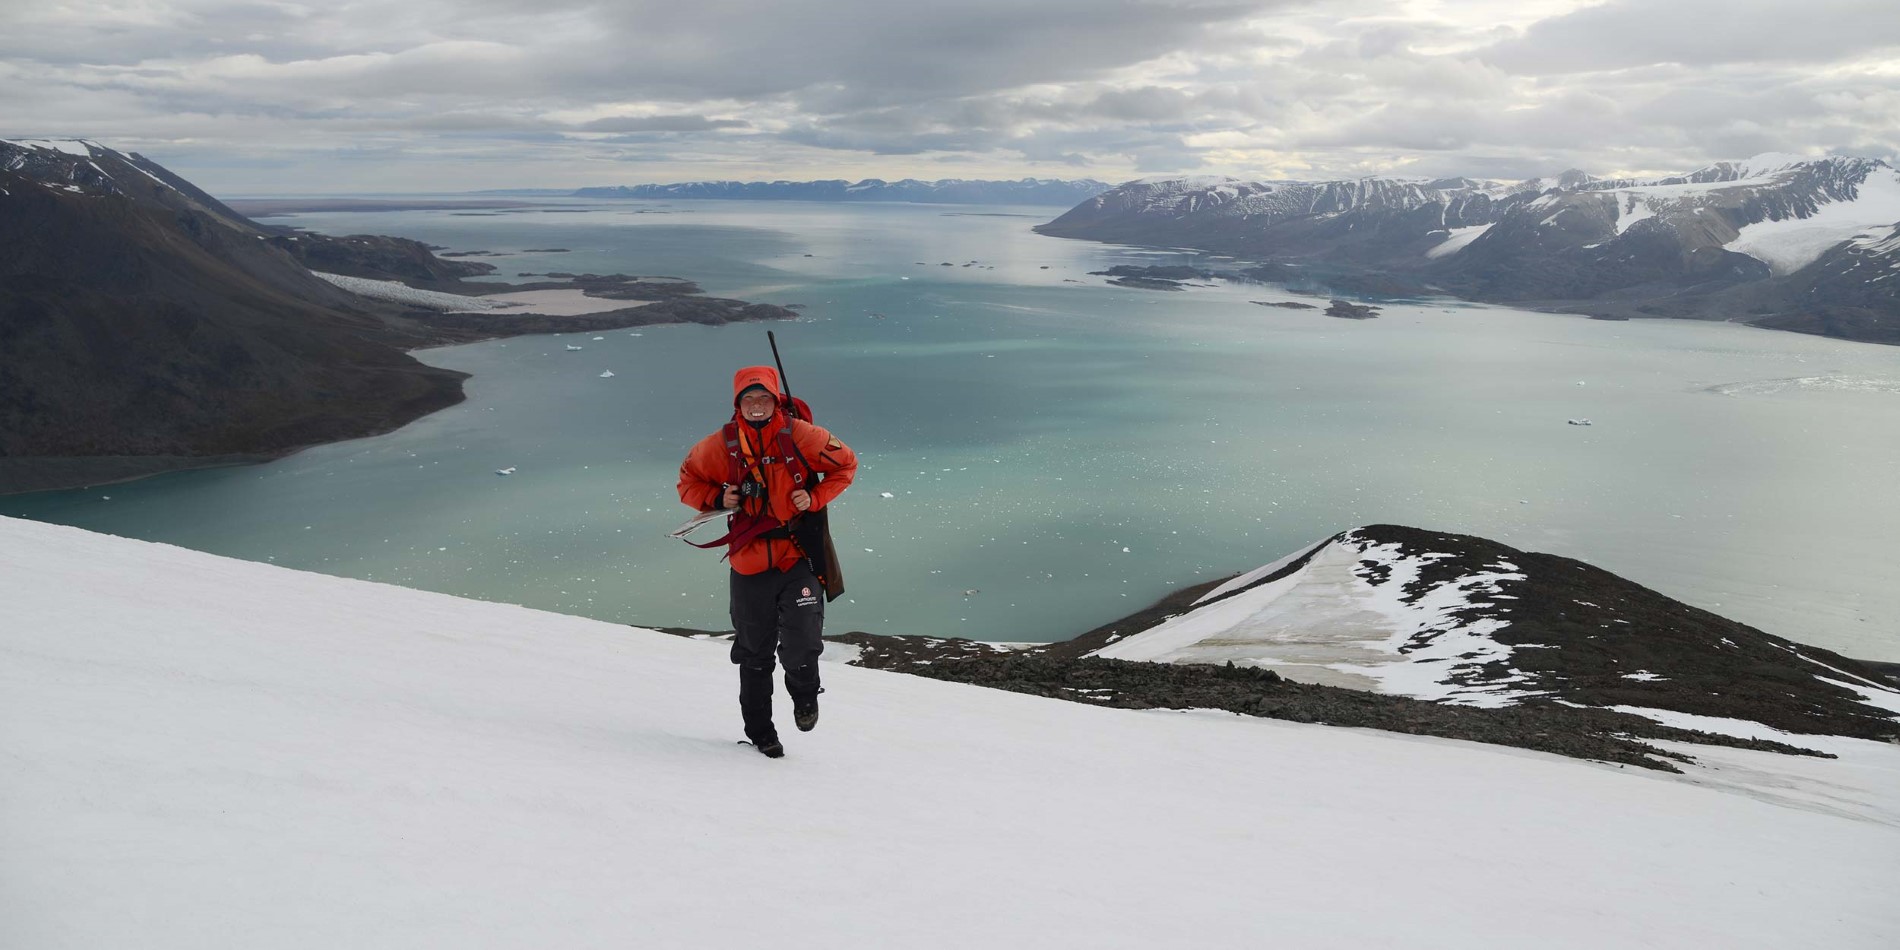 The steep mountains, long fjords and Arctic nature make Spitsbergen an exotic adventure